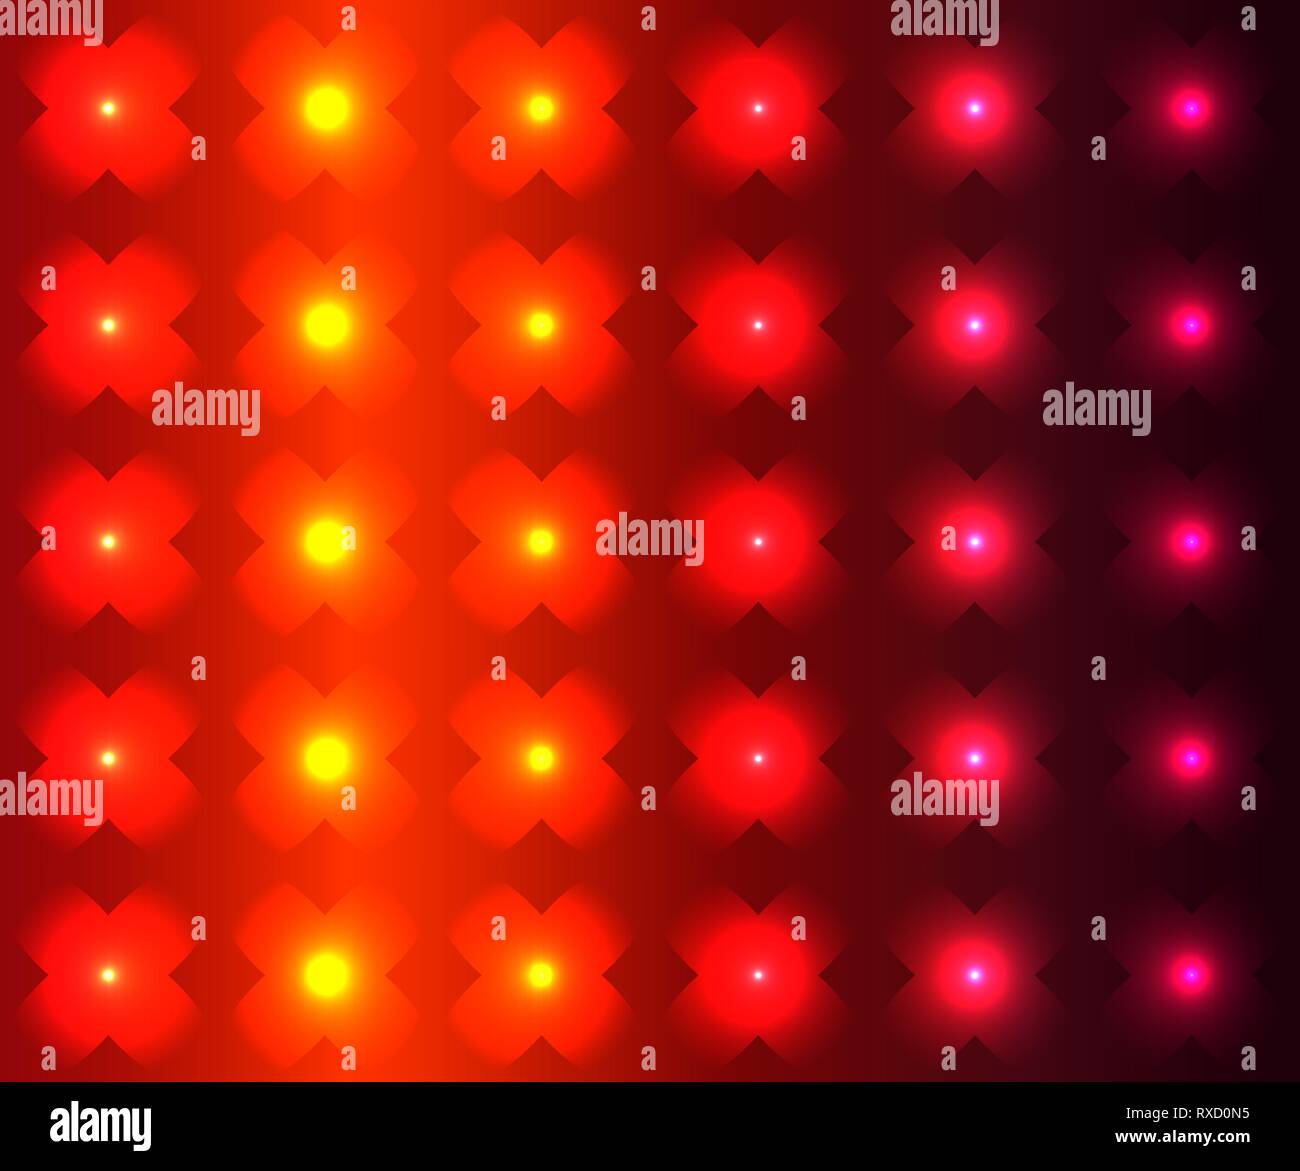 Red and purple shades gradiend and sparkling flowers background, shadow effect Stock Vector